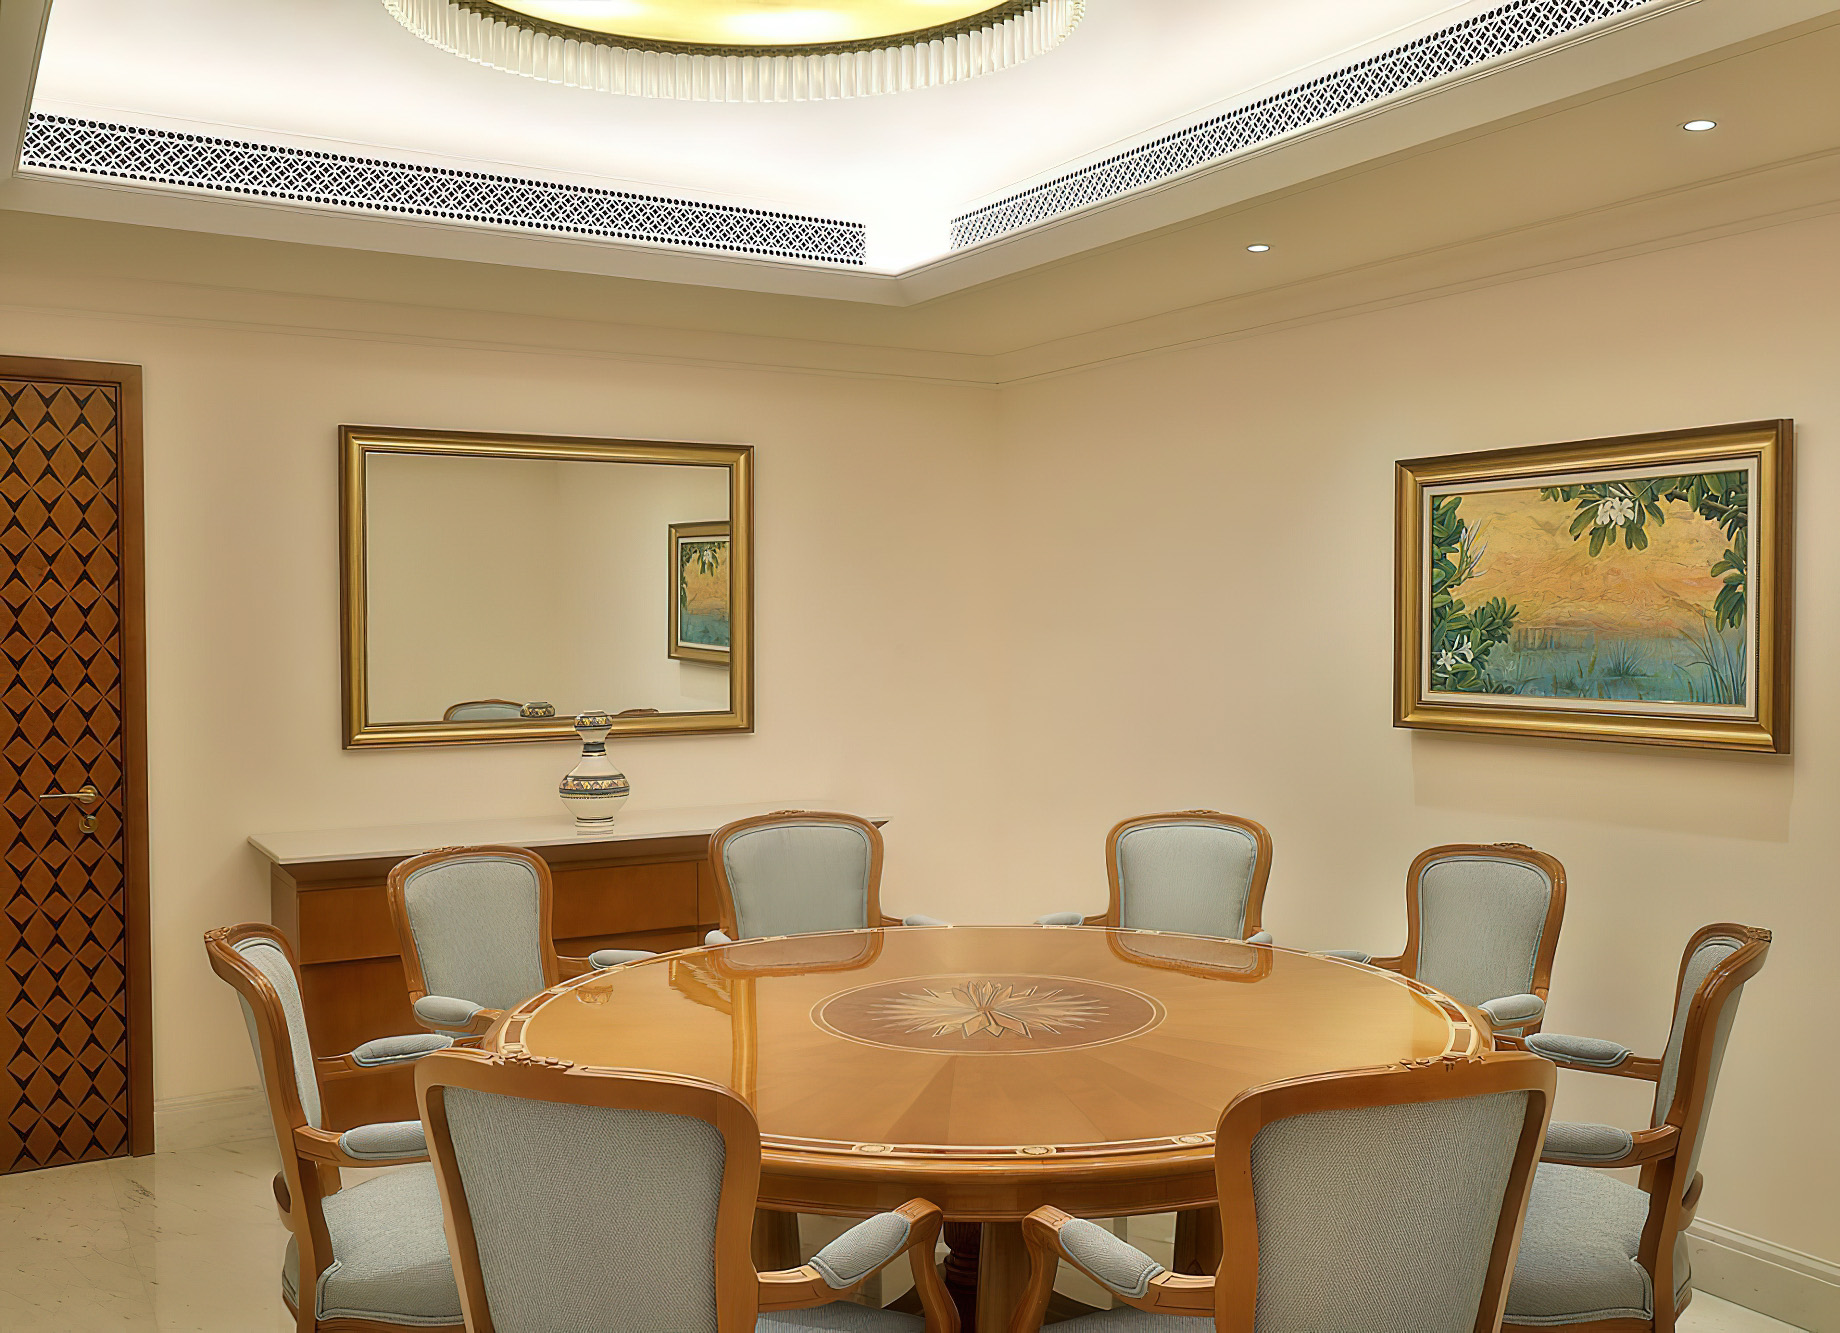 Al Bustan Palace, A Ritz-Carlton Hotel – Muscat, Oman – Presidential Sea View Suite Dining Table